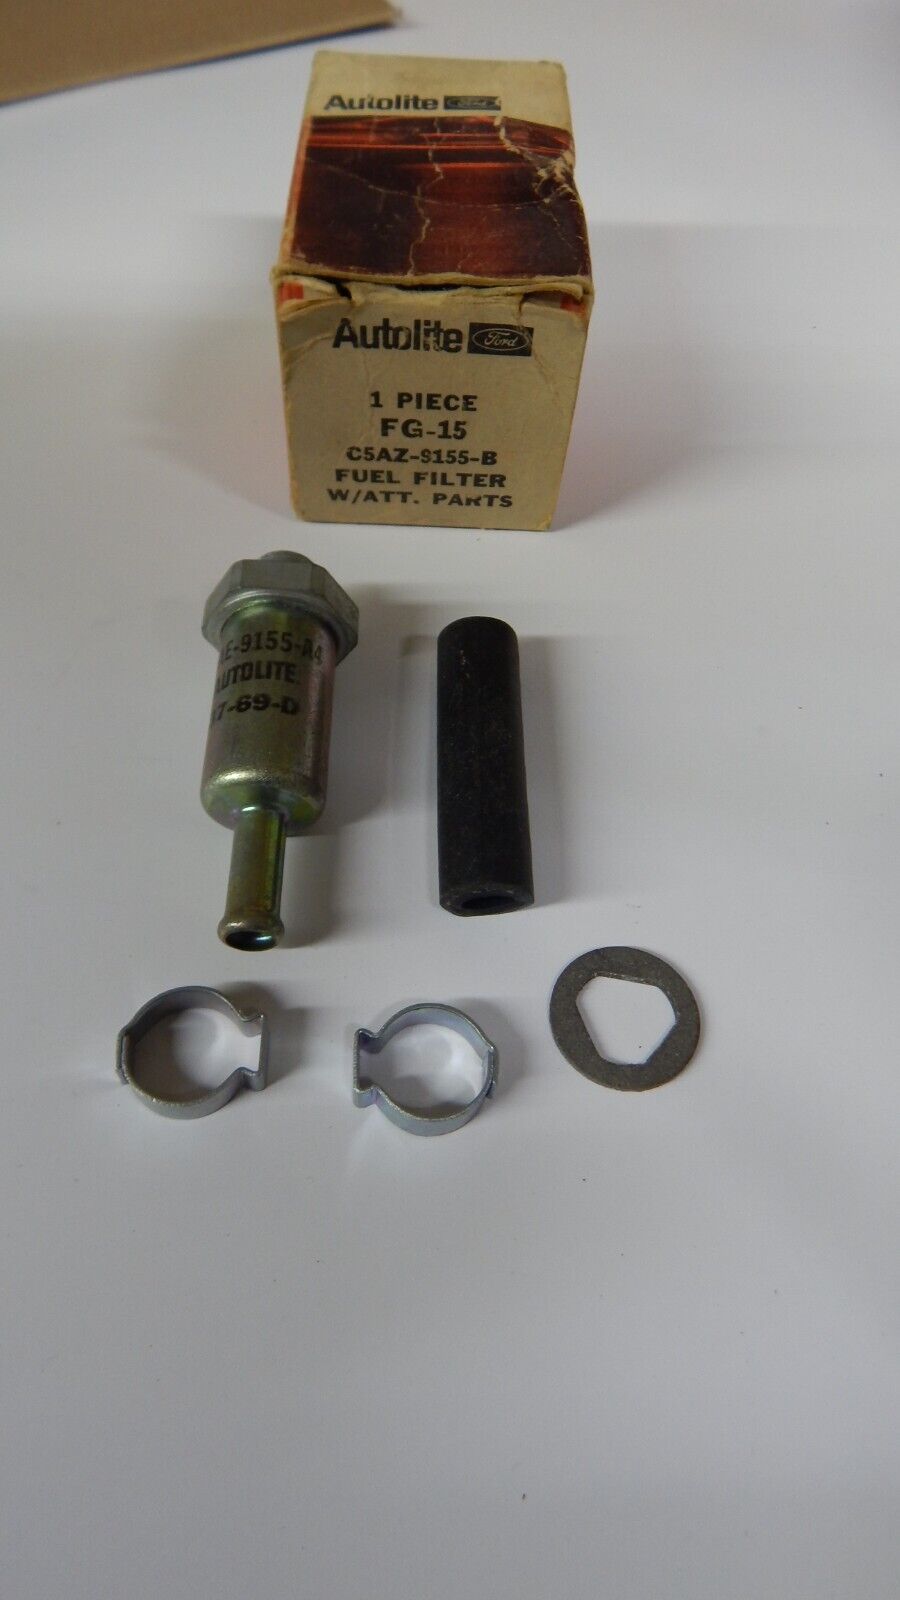 NOS 1969 FORD GALAXIE 428 POLICE CAR 1967 FORD MUSTANG 289H/P FUEL FILTER